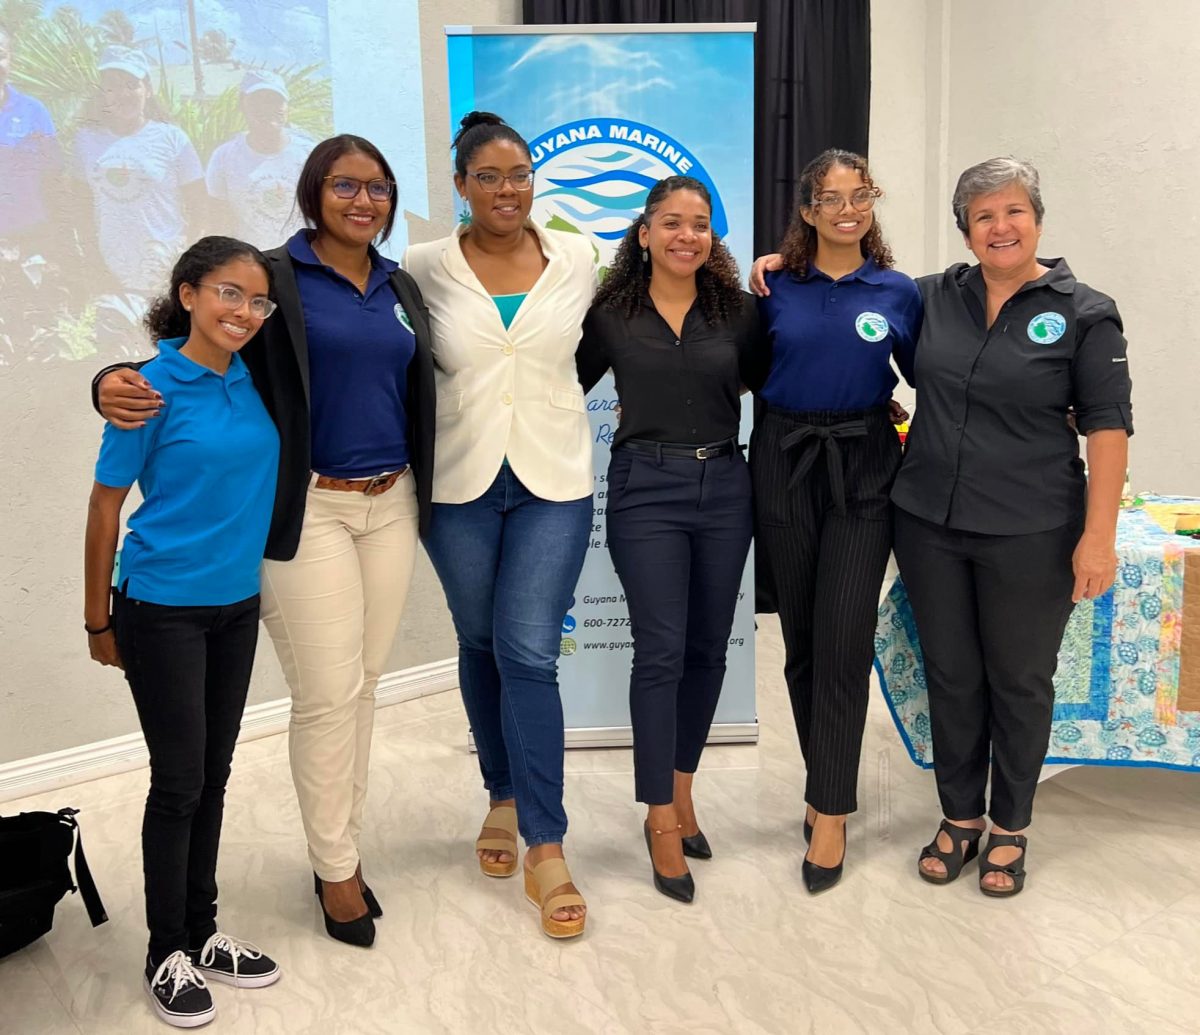 Founder of the Guyana Marine Conservation Society Annette Arjoon–Martins (at far right) and her team of marine scientists